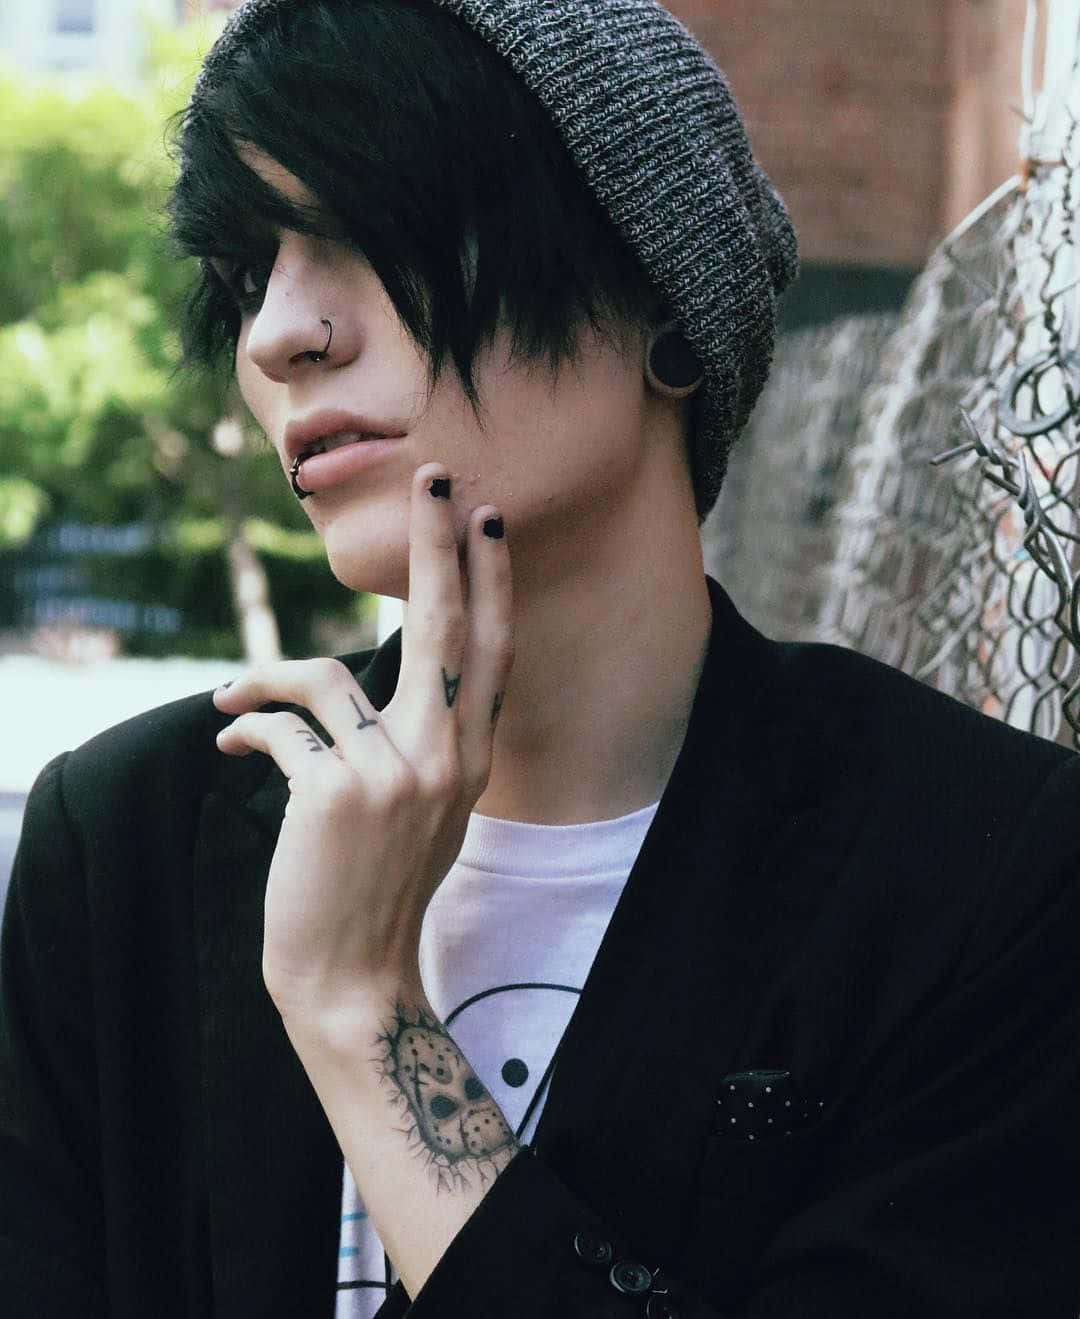 Emo Styled Youth Outdoors Wallpaper